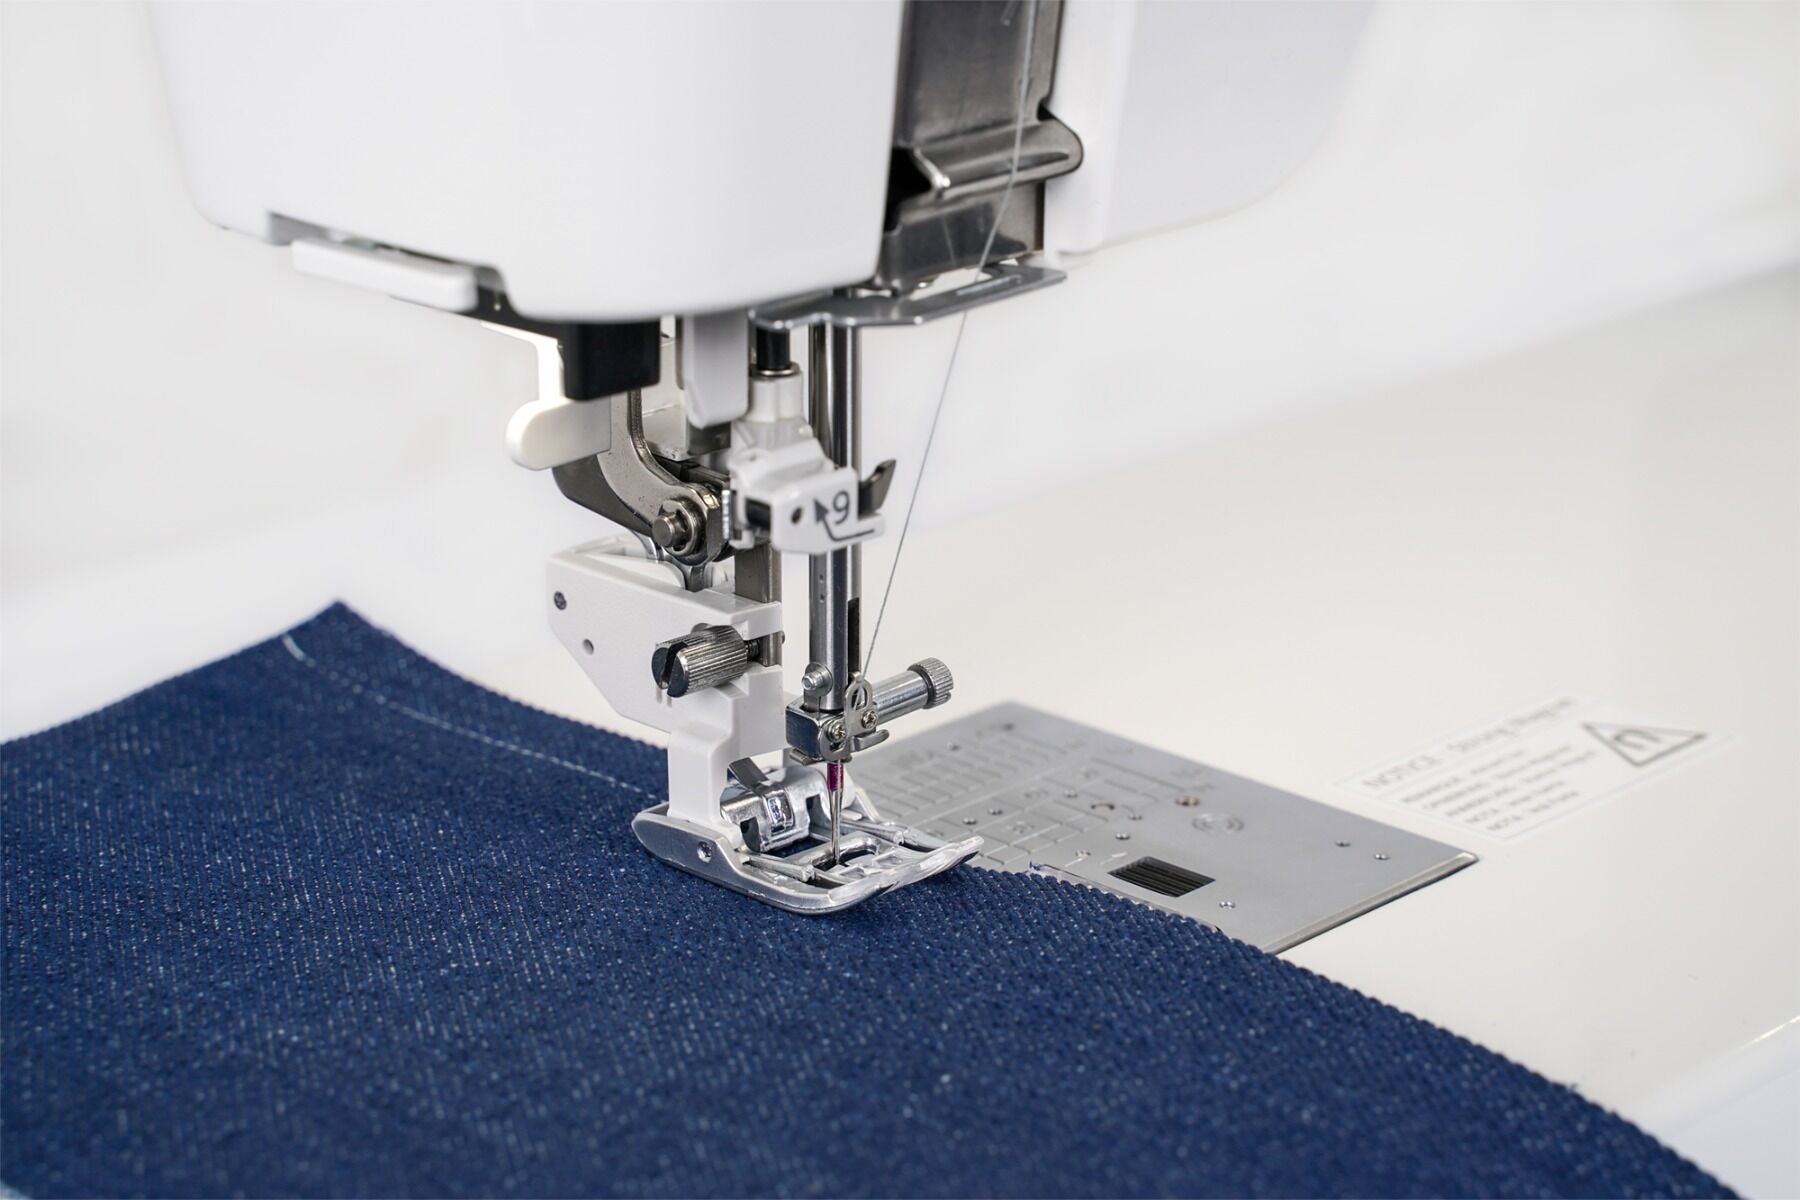 Best Sewing Machine for Quilting - Beginner Through Professional